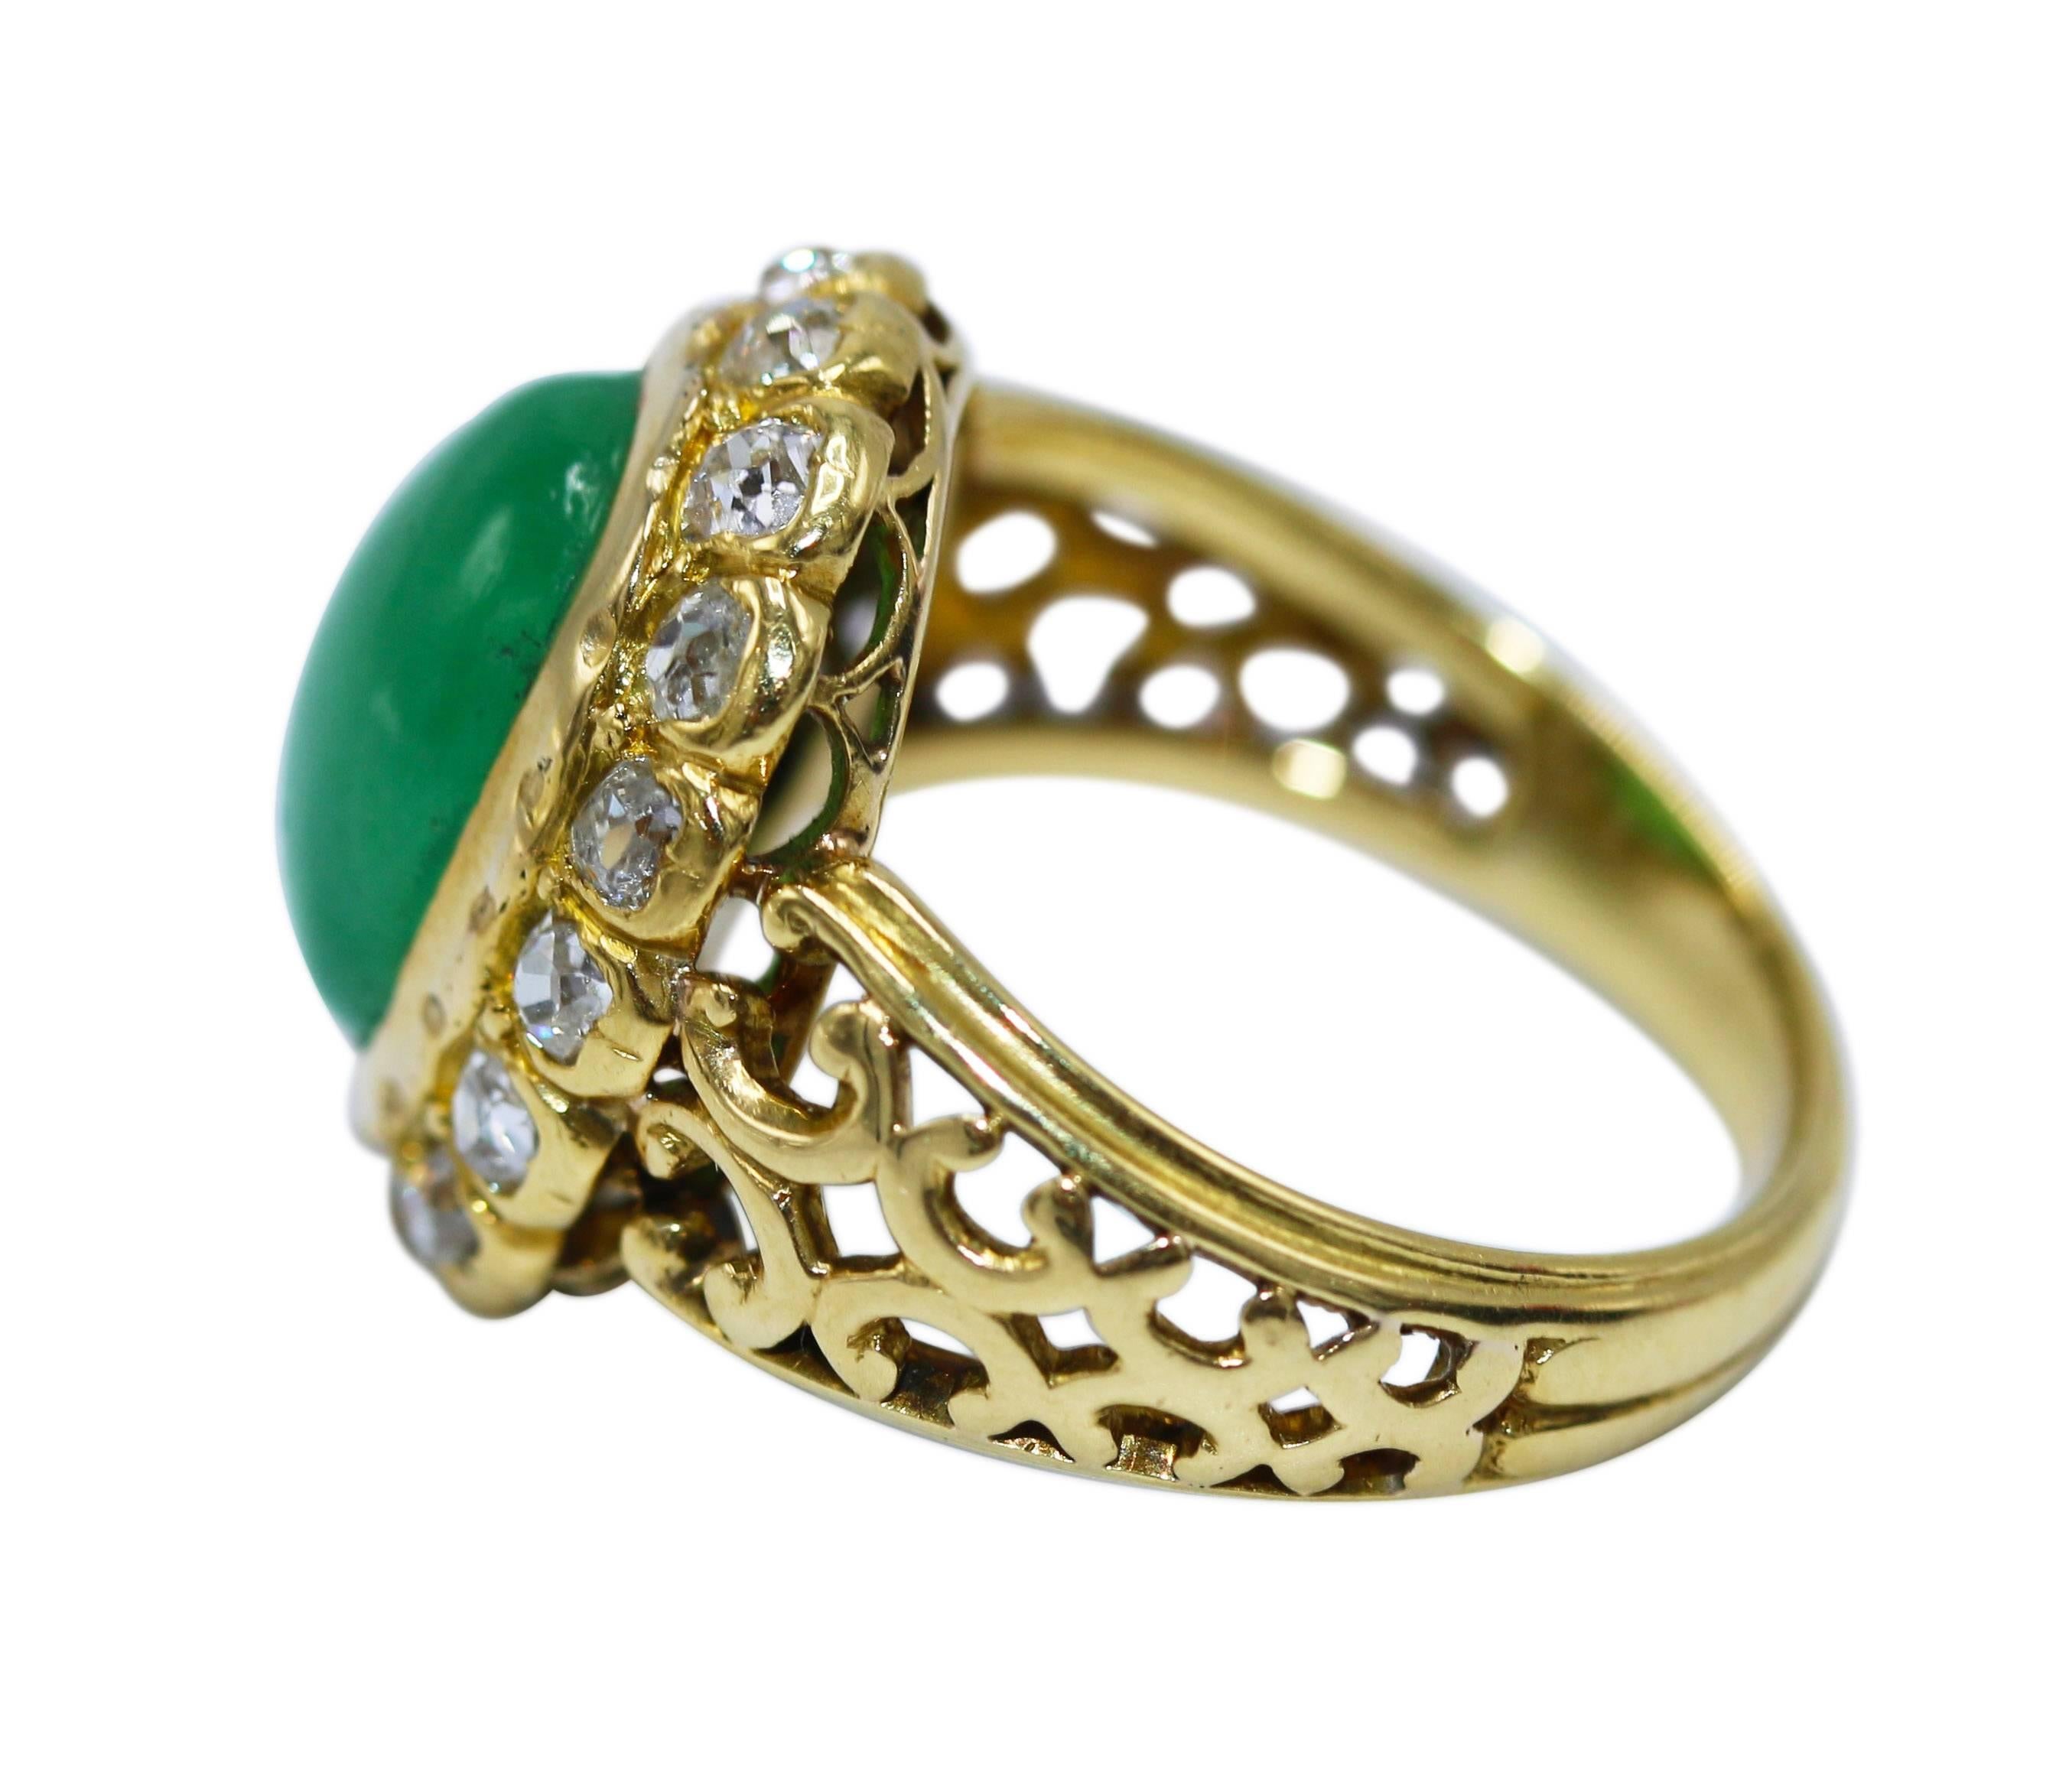 Victorian 18 karat yellow gold, jadeite and diamond ring, set in the center with a cabochon jadeite weighing approximately 5.75 carats, framed by old European-cut diamonds weighing approximately 0.90 carat, gross weight 7.1 grams, size 6.
Such a